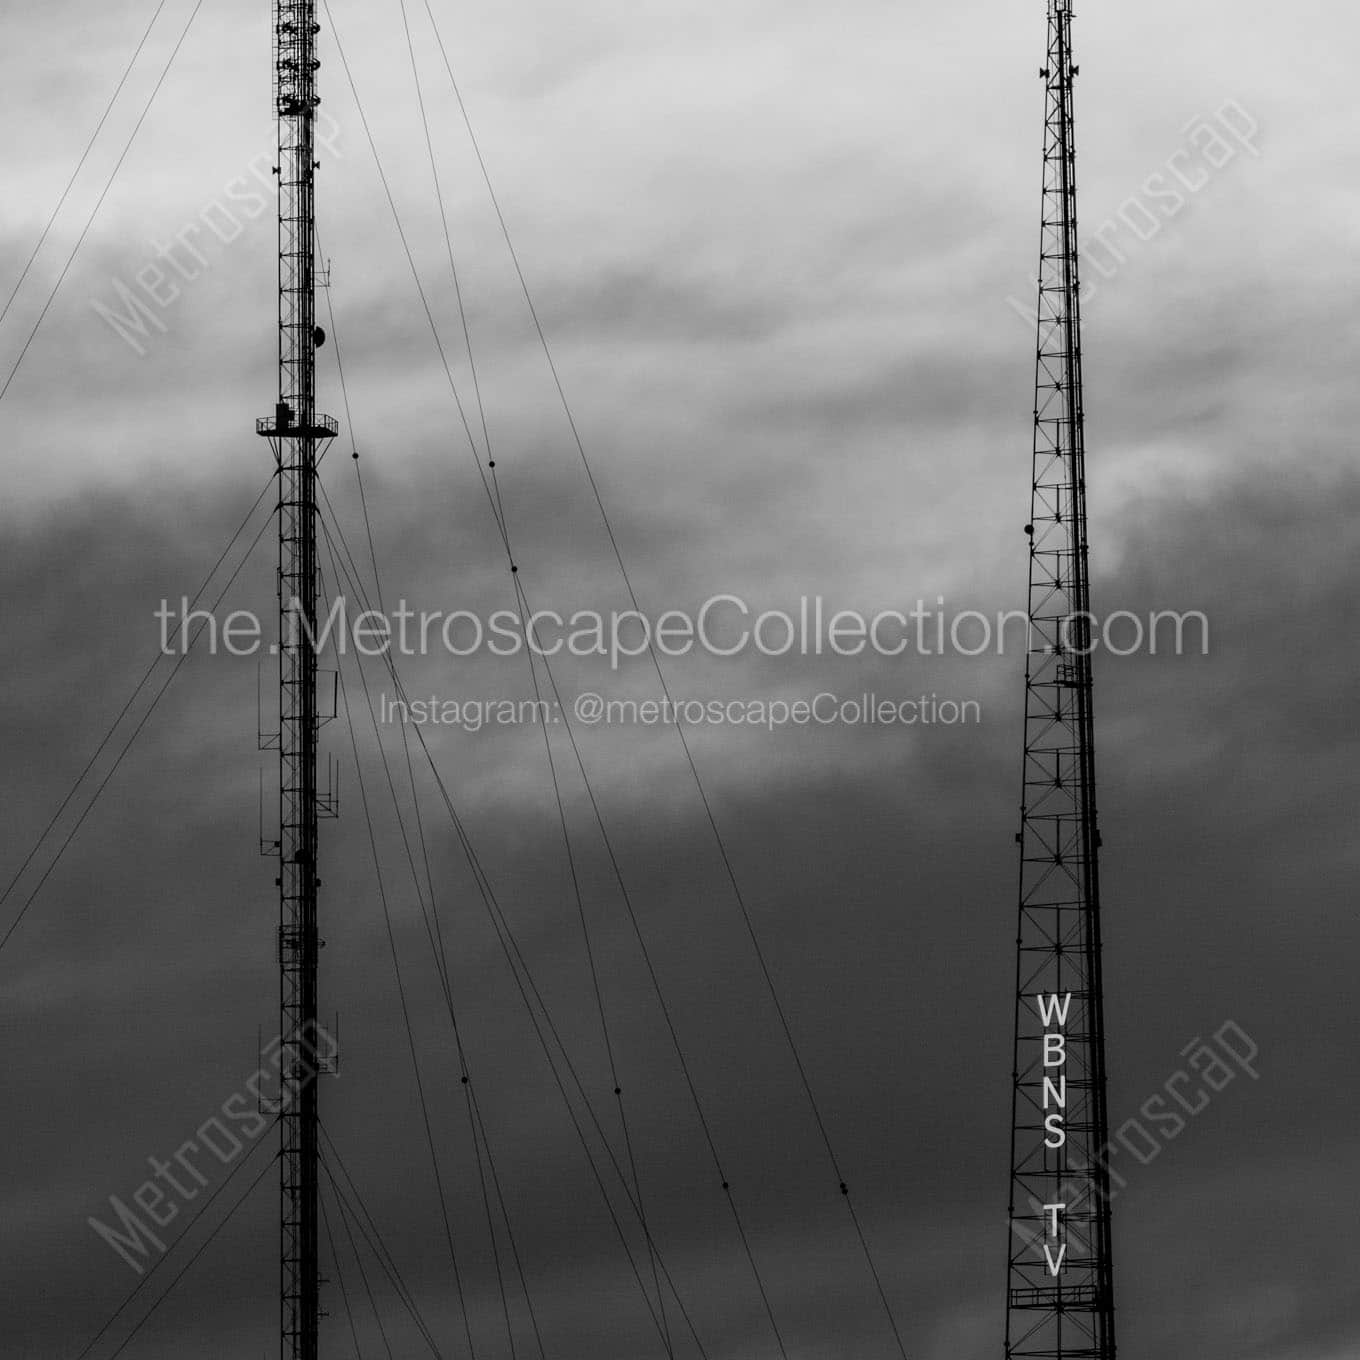 wbns tv towers off 315 and 670 Black & White Office Art